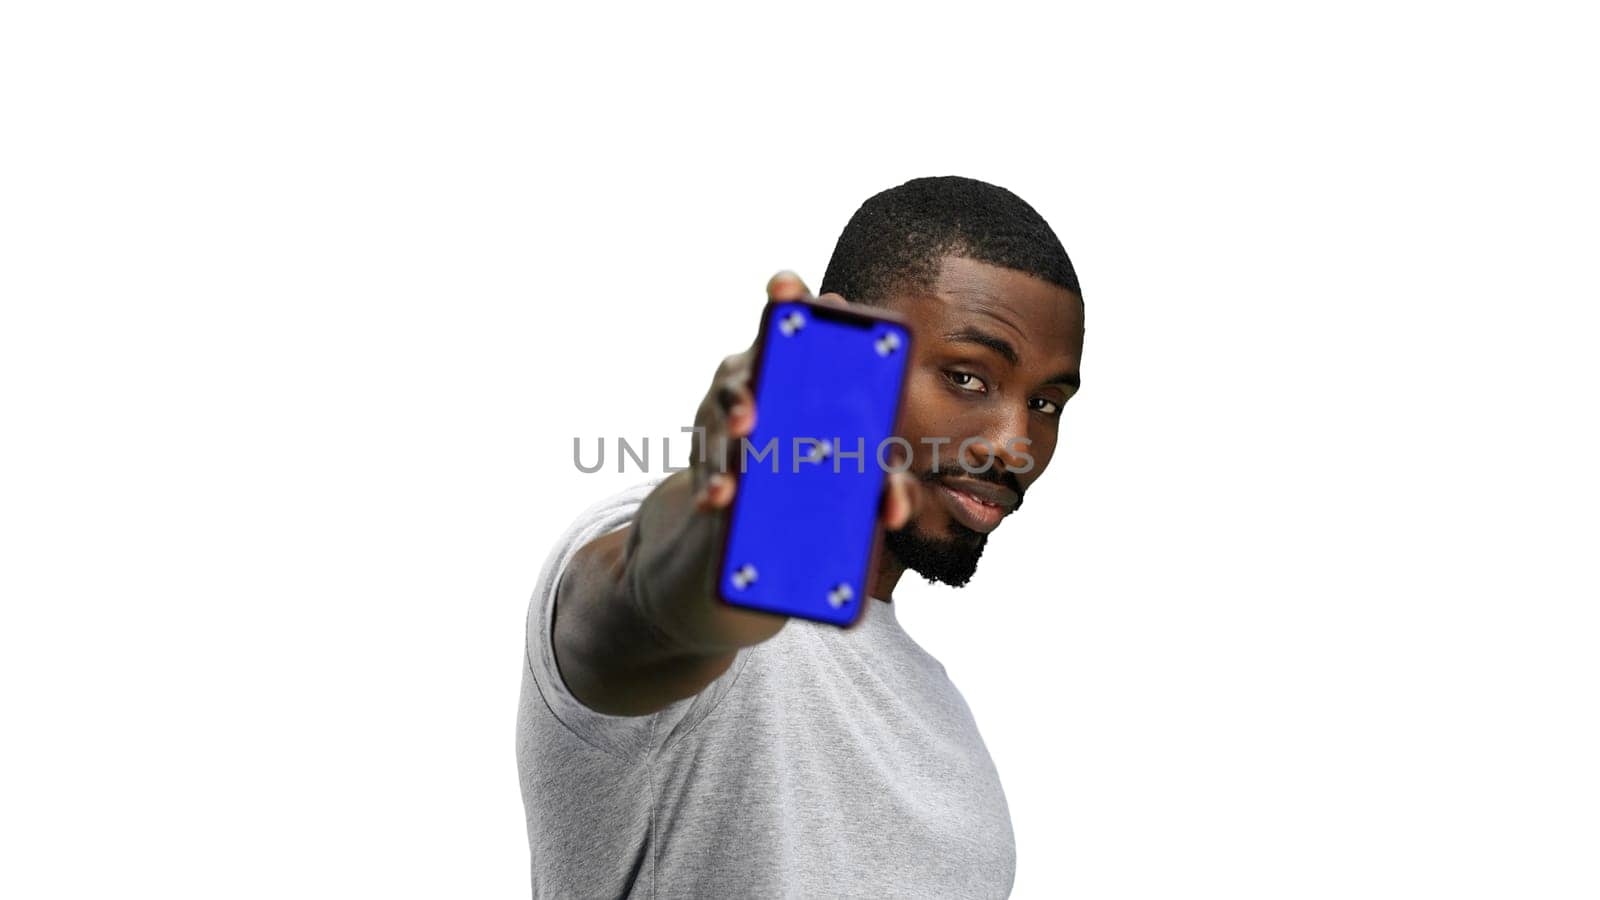 A man, close-up, on a white background, shows a phone.